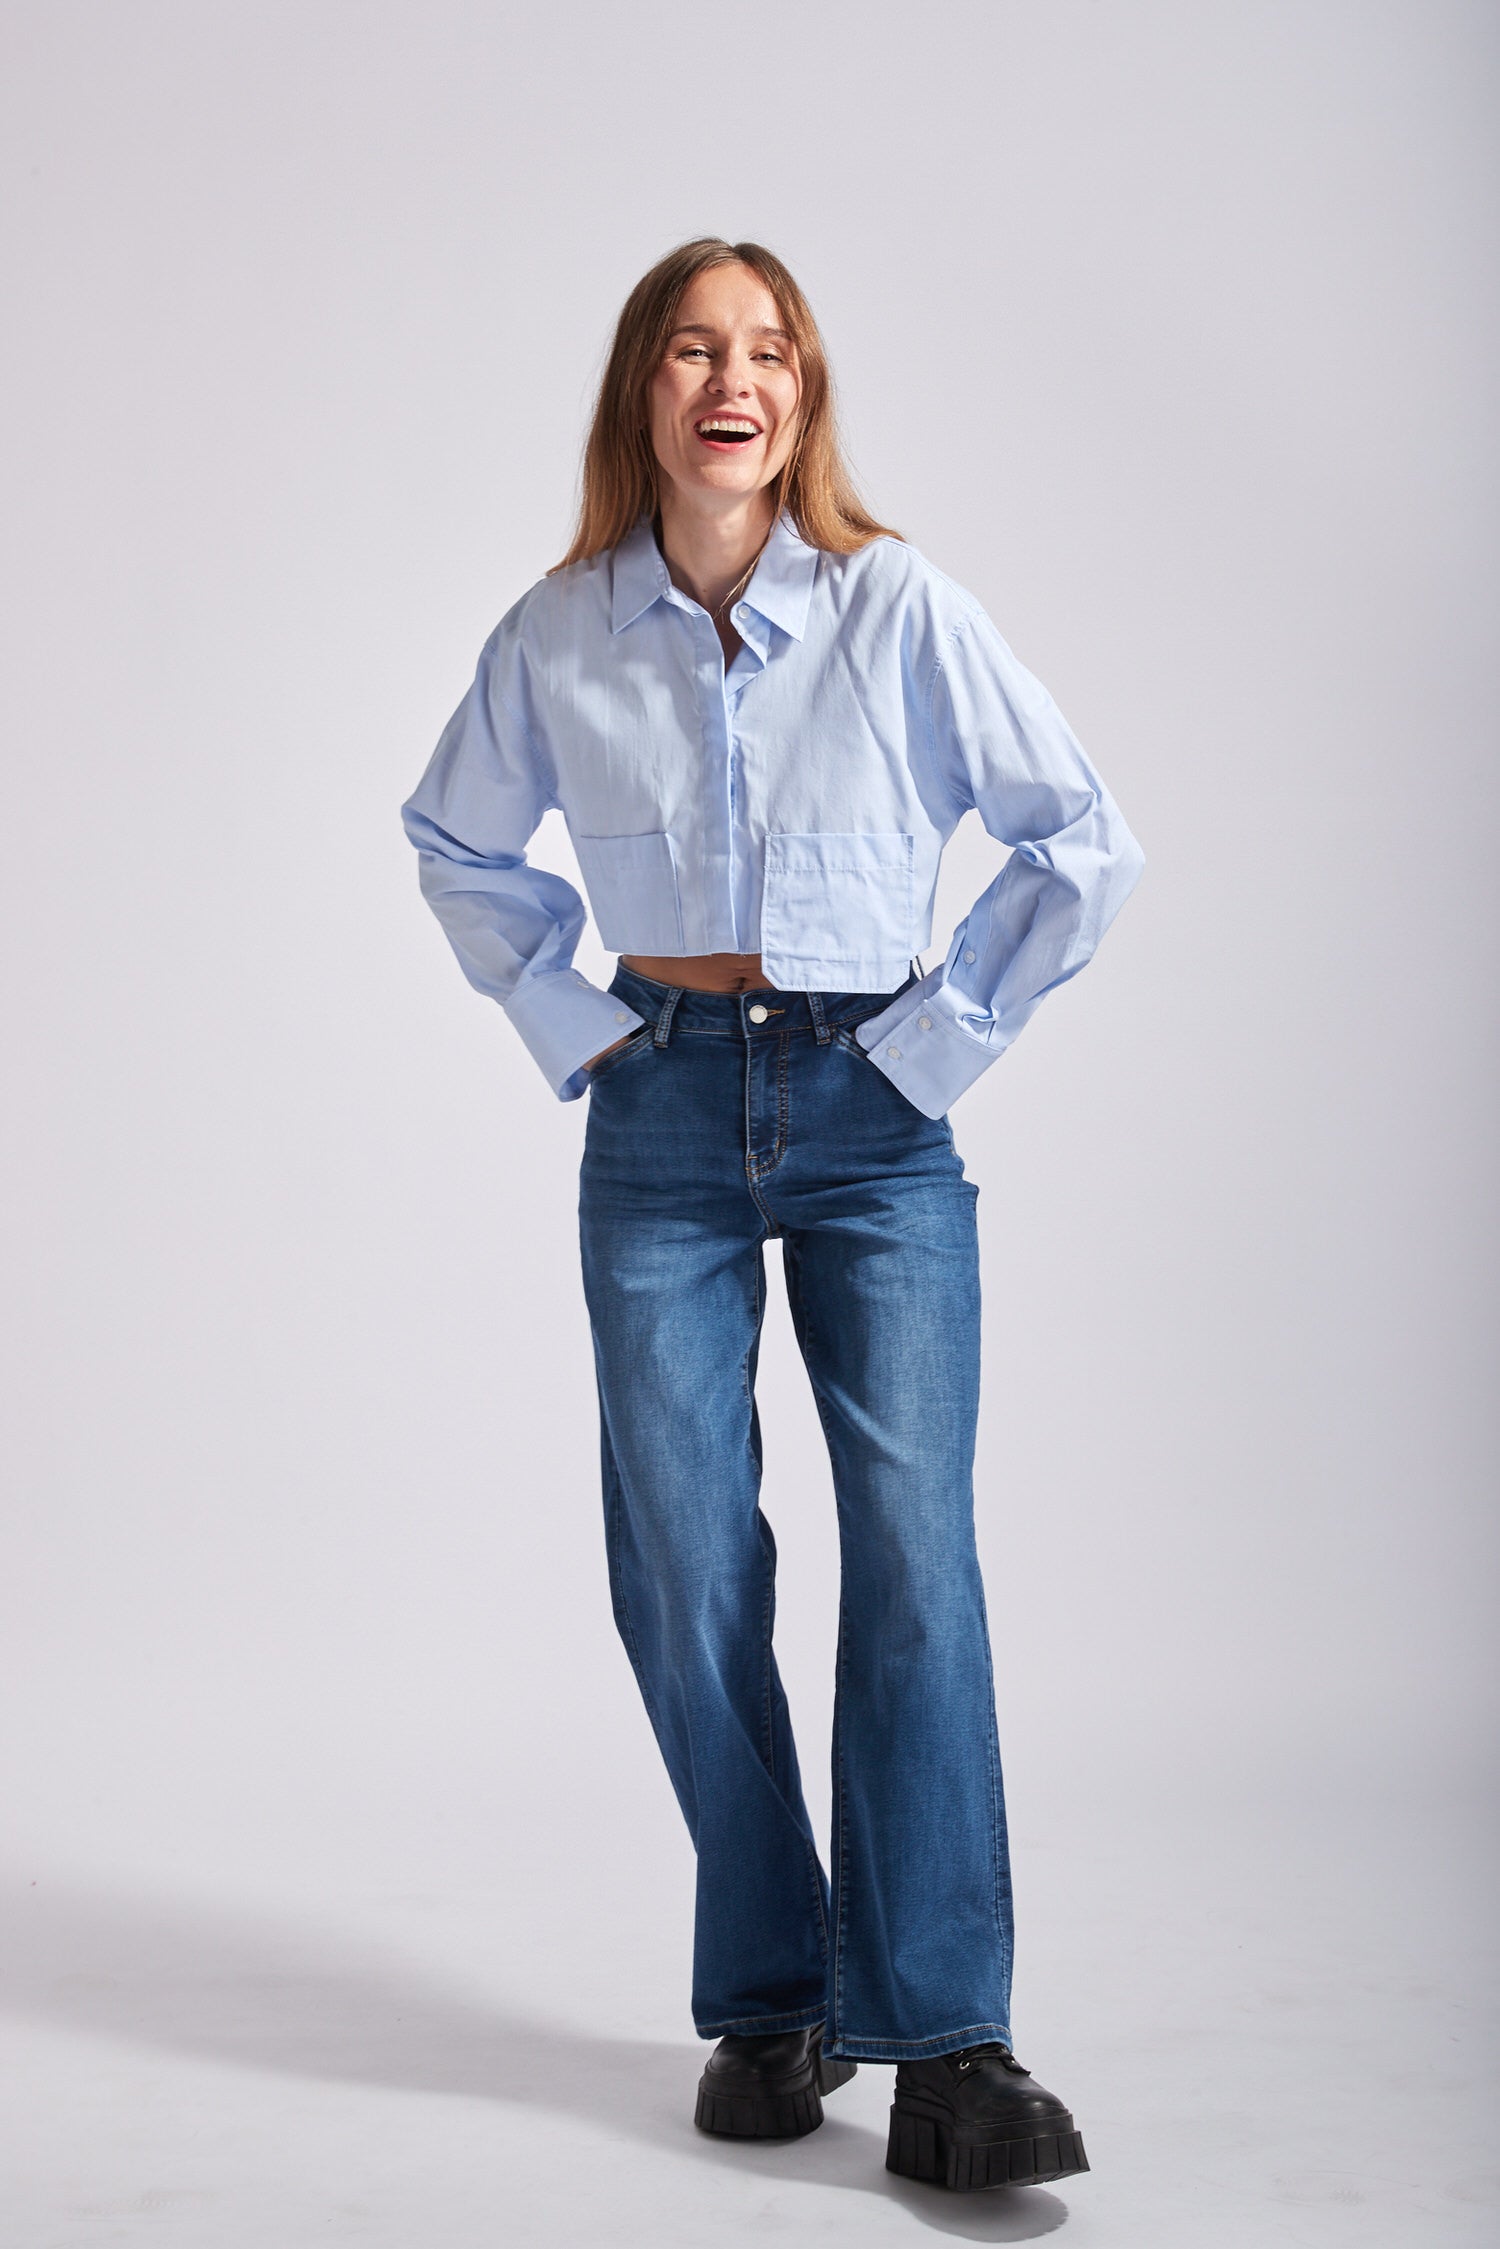 Grote stretch jeans - Alix